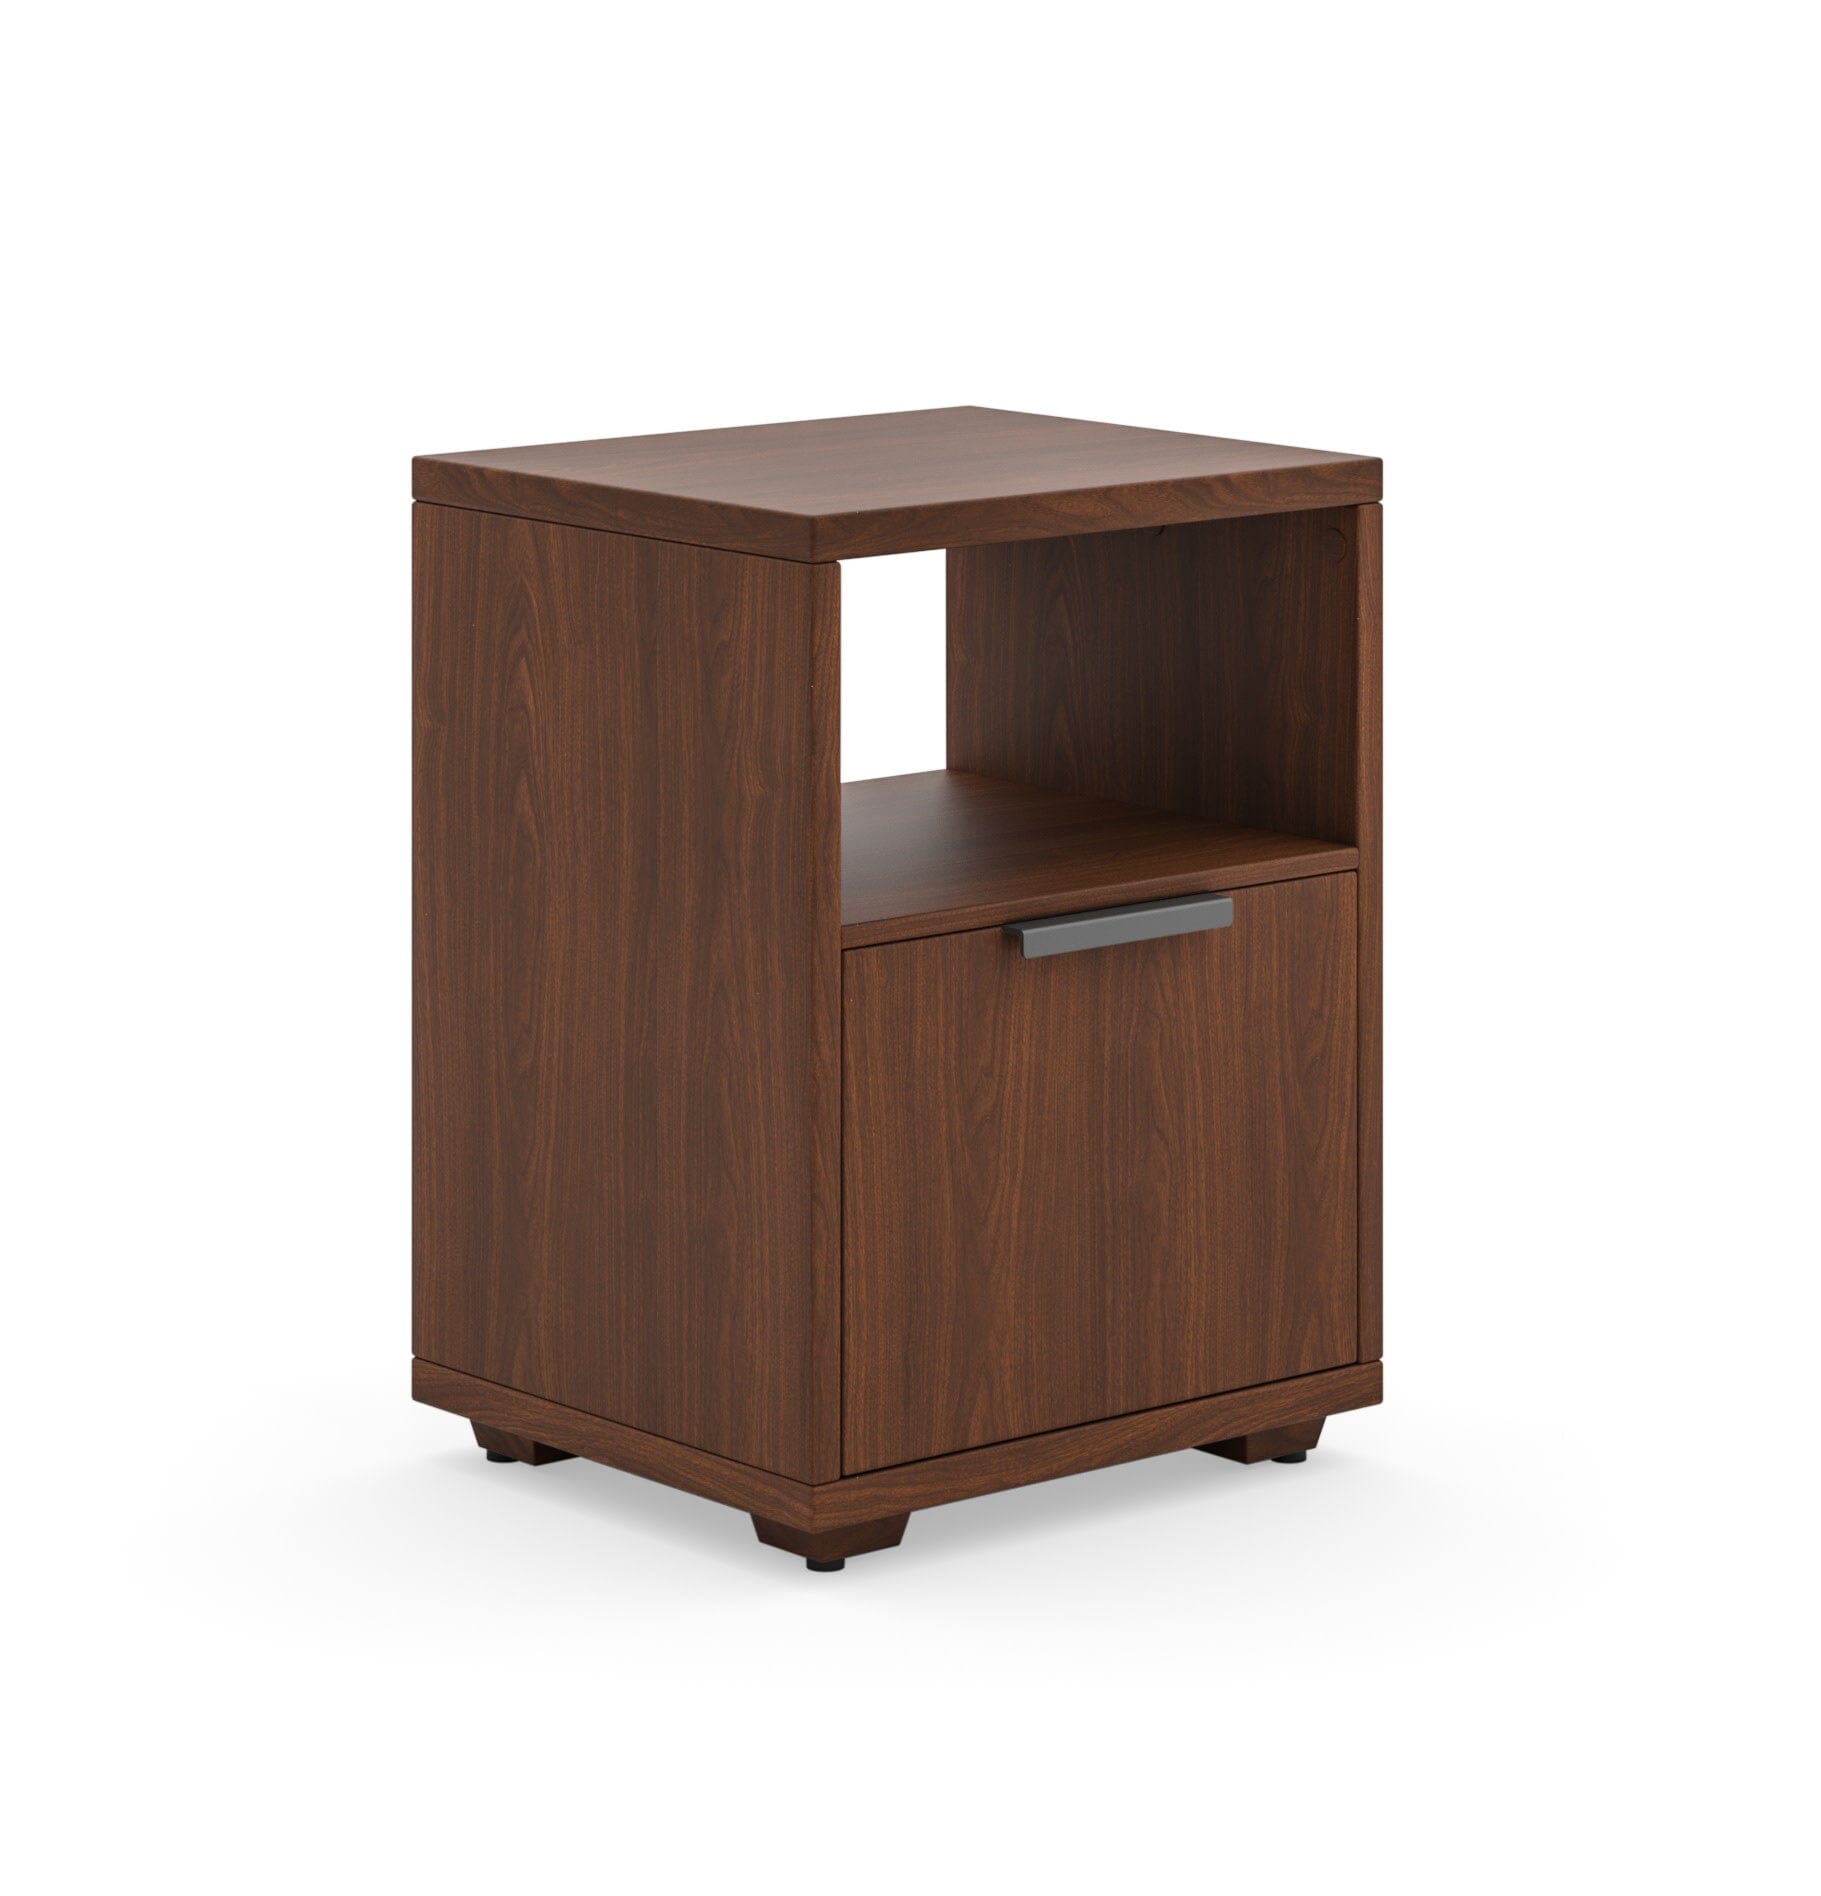 Modern & Contemporary Standing Desk and File Cabinet By Merge Desk Merge